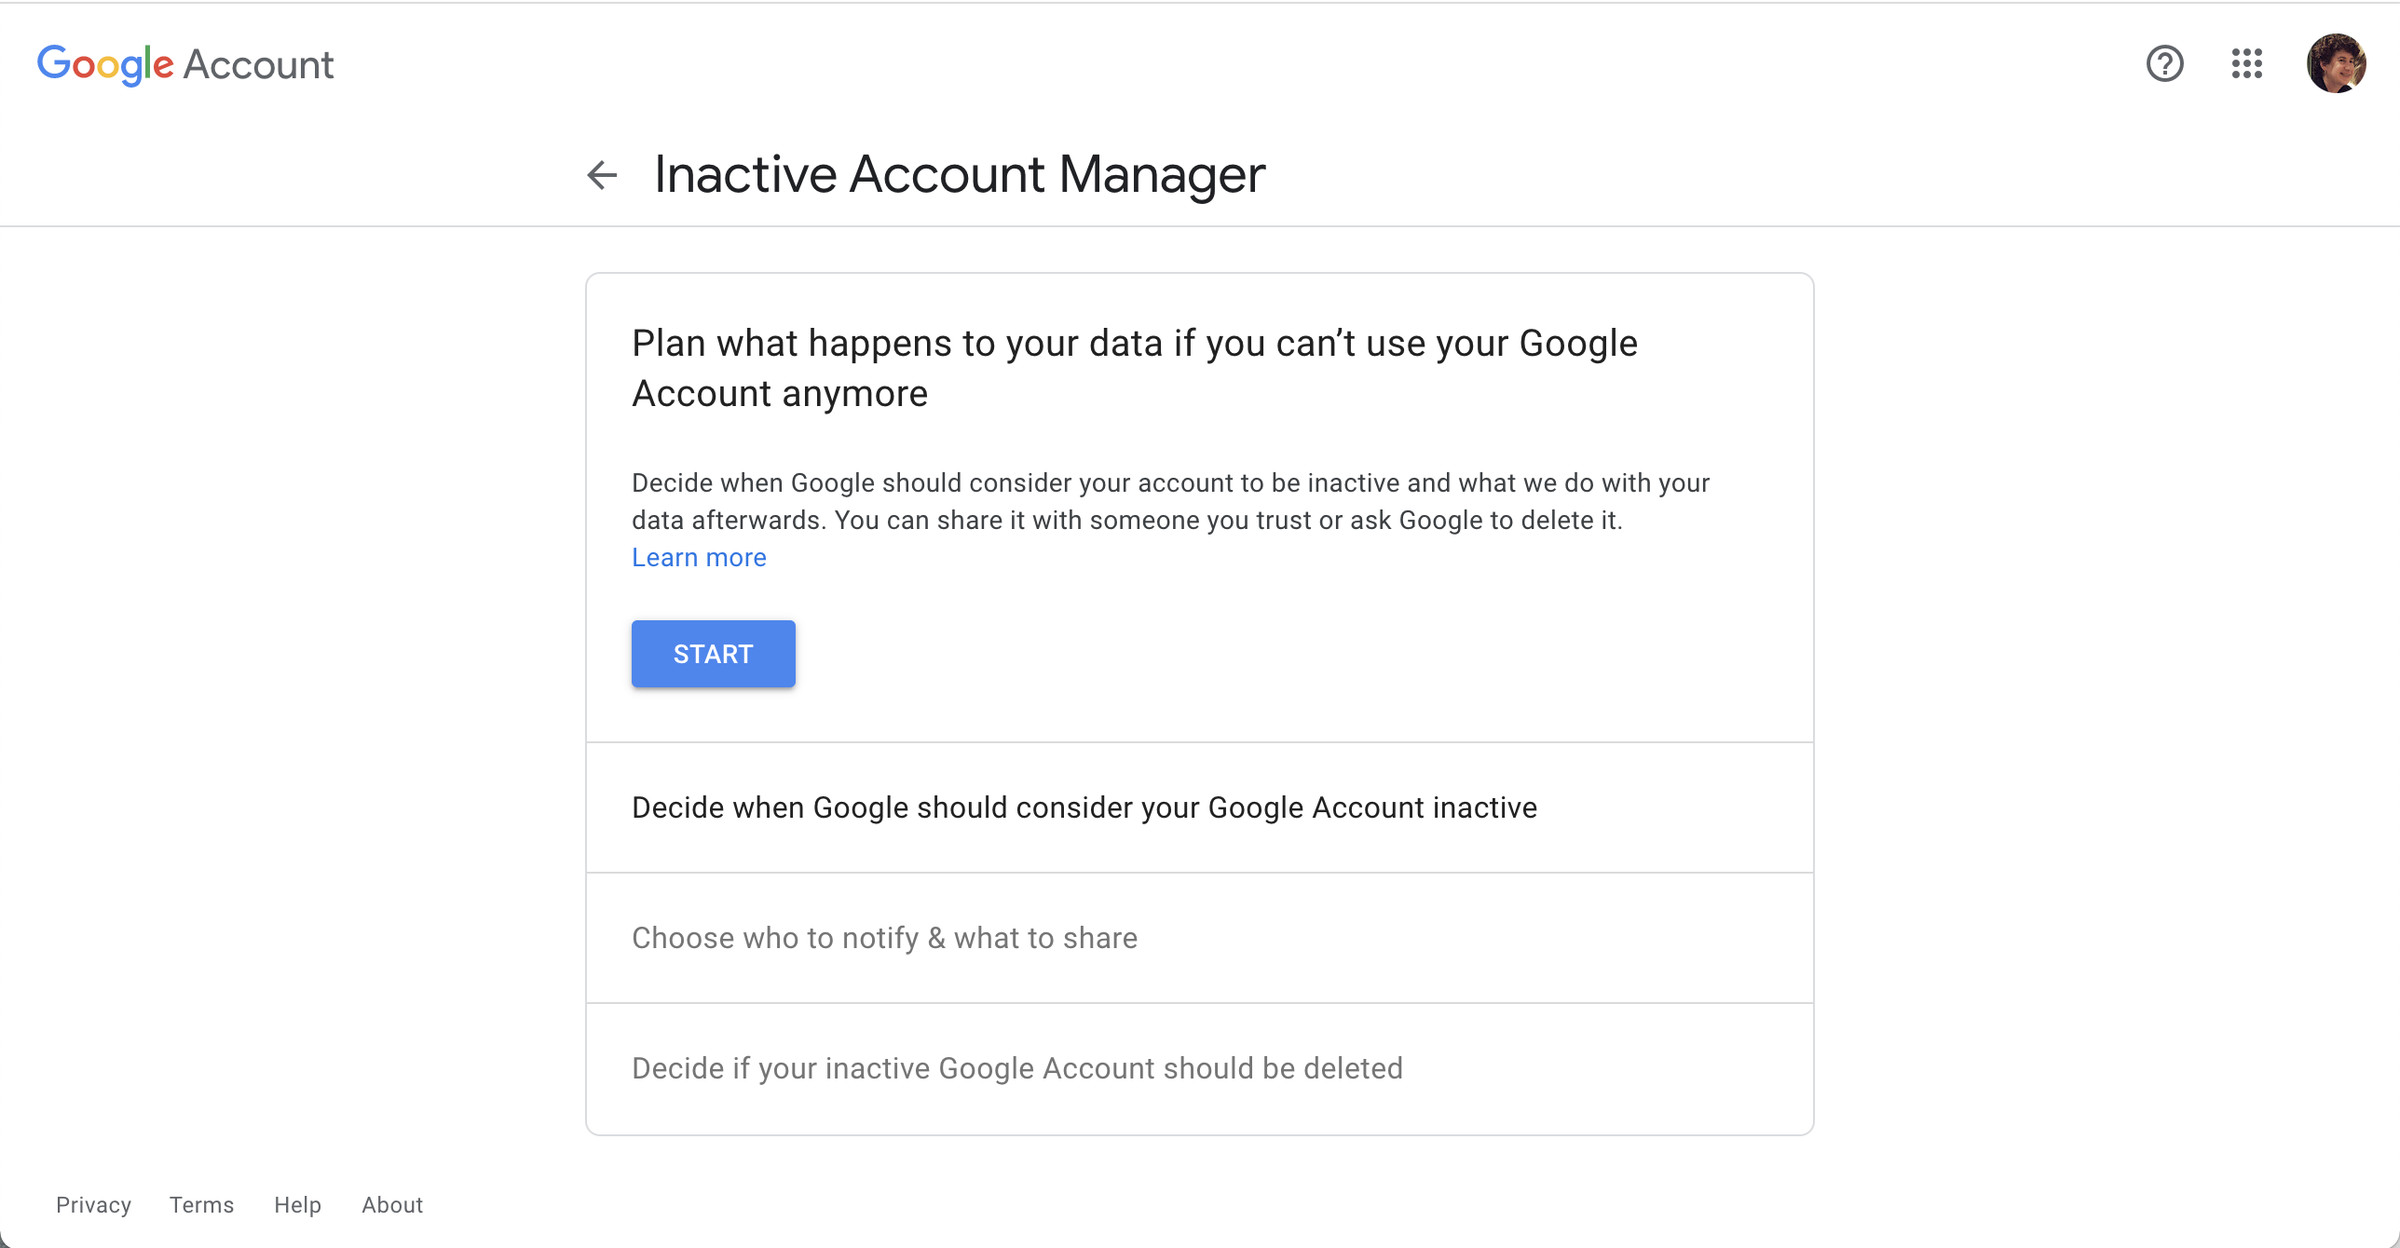 Google’s Inactive Account Manager offers a variety of options for what to do with your data.